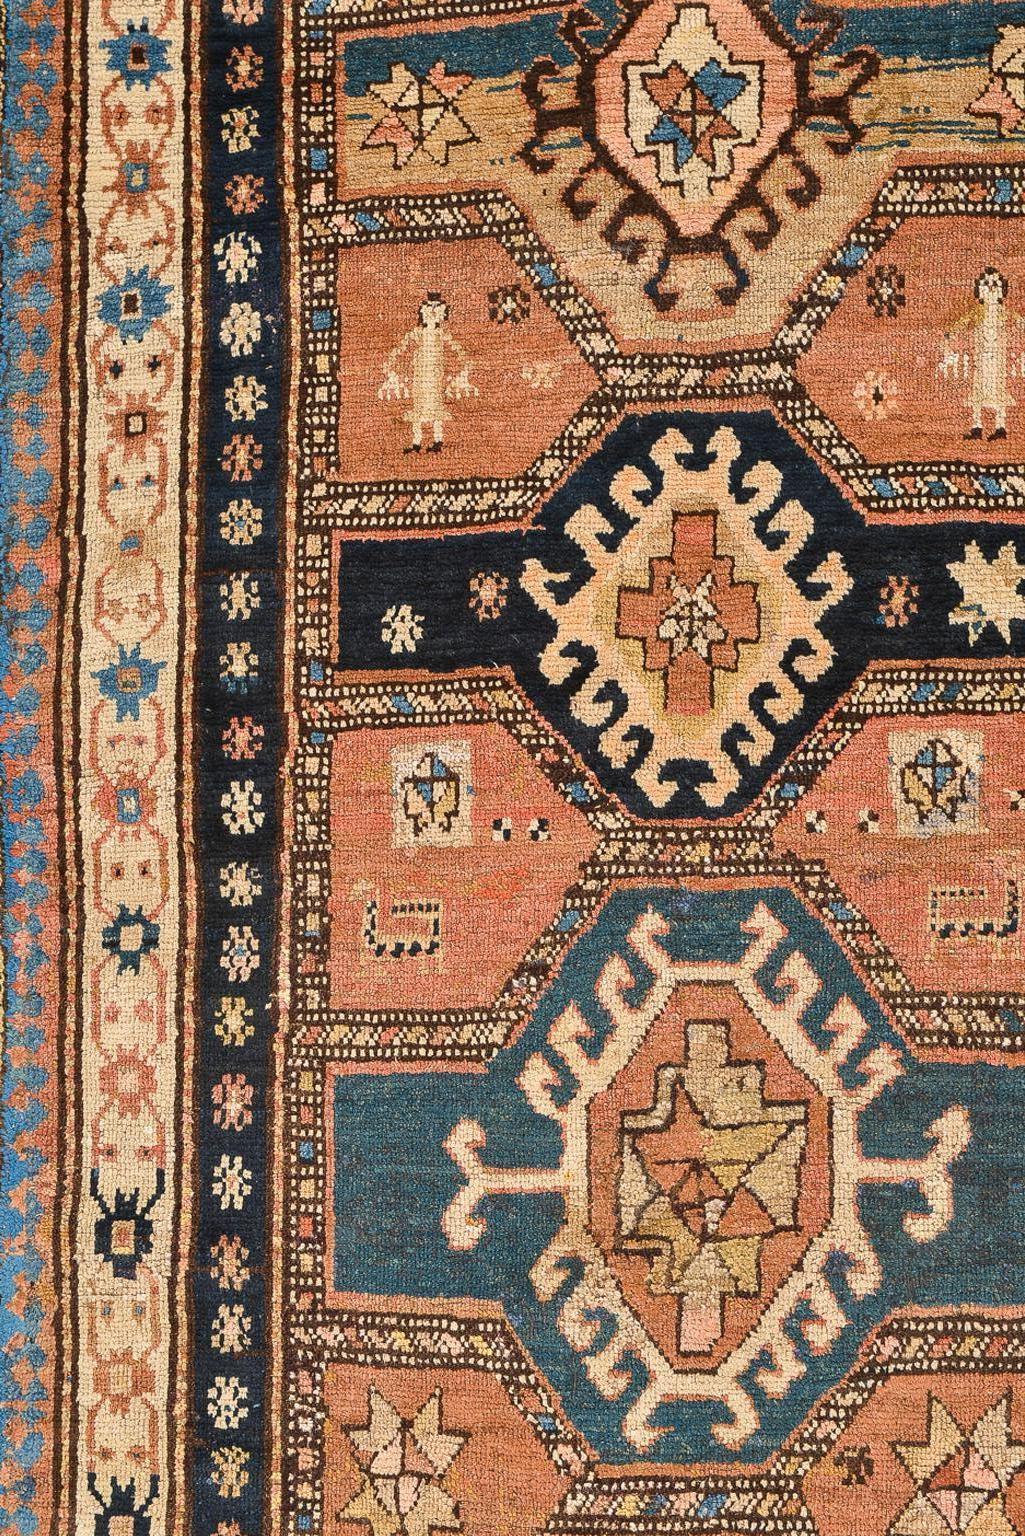 Antique soft runner, light blue colors on camel hair, beautiful to look and enjoy, maybe in front of a library or on wall: to admire . The photographs do not reflect the beauty of the colors. It's one of the most beautiful runners  I have seen.
 The